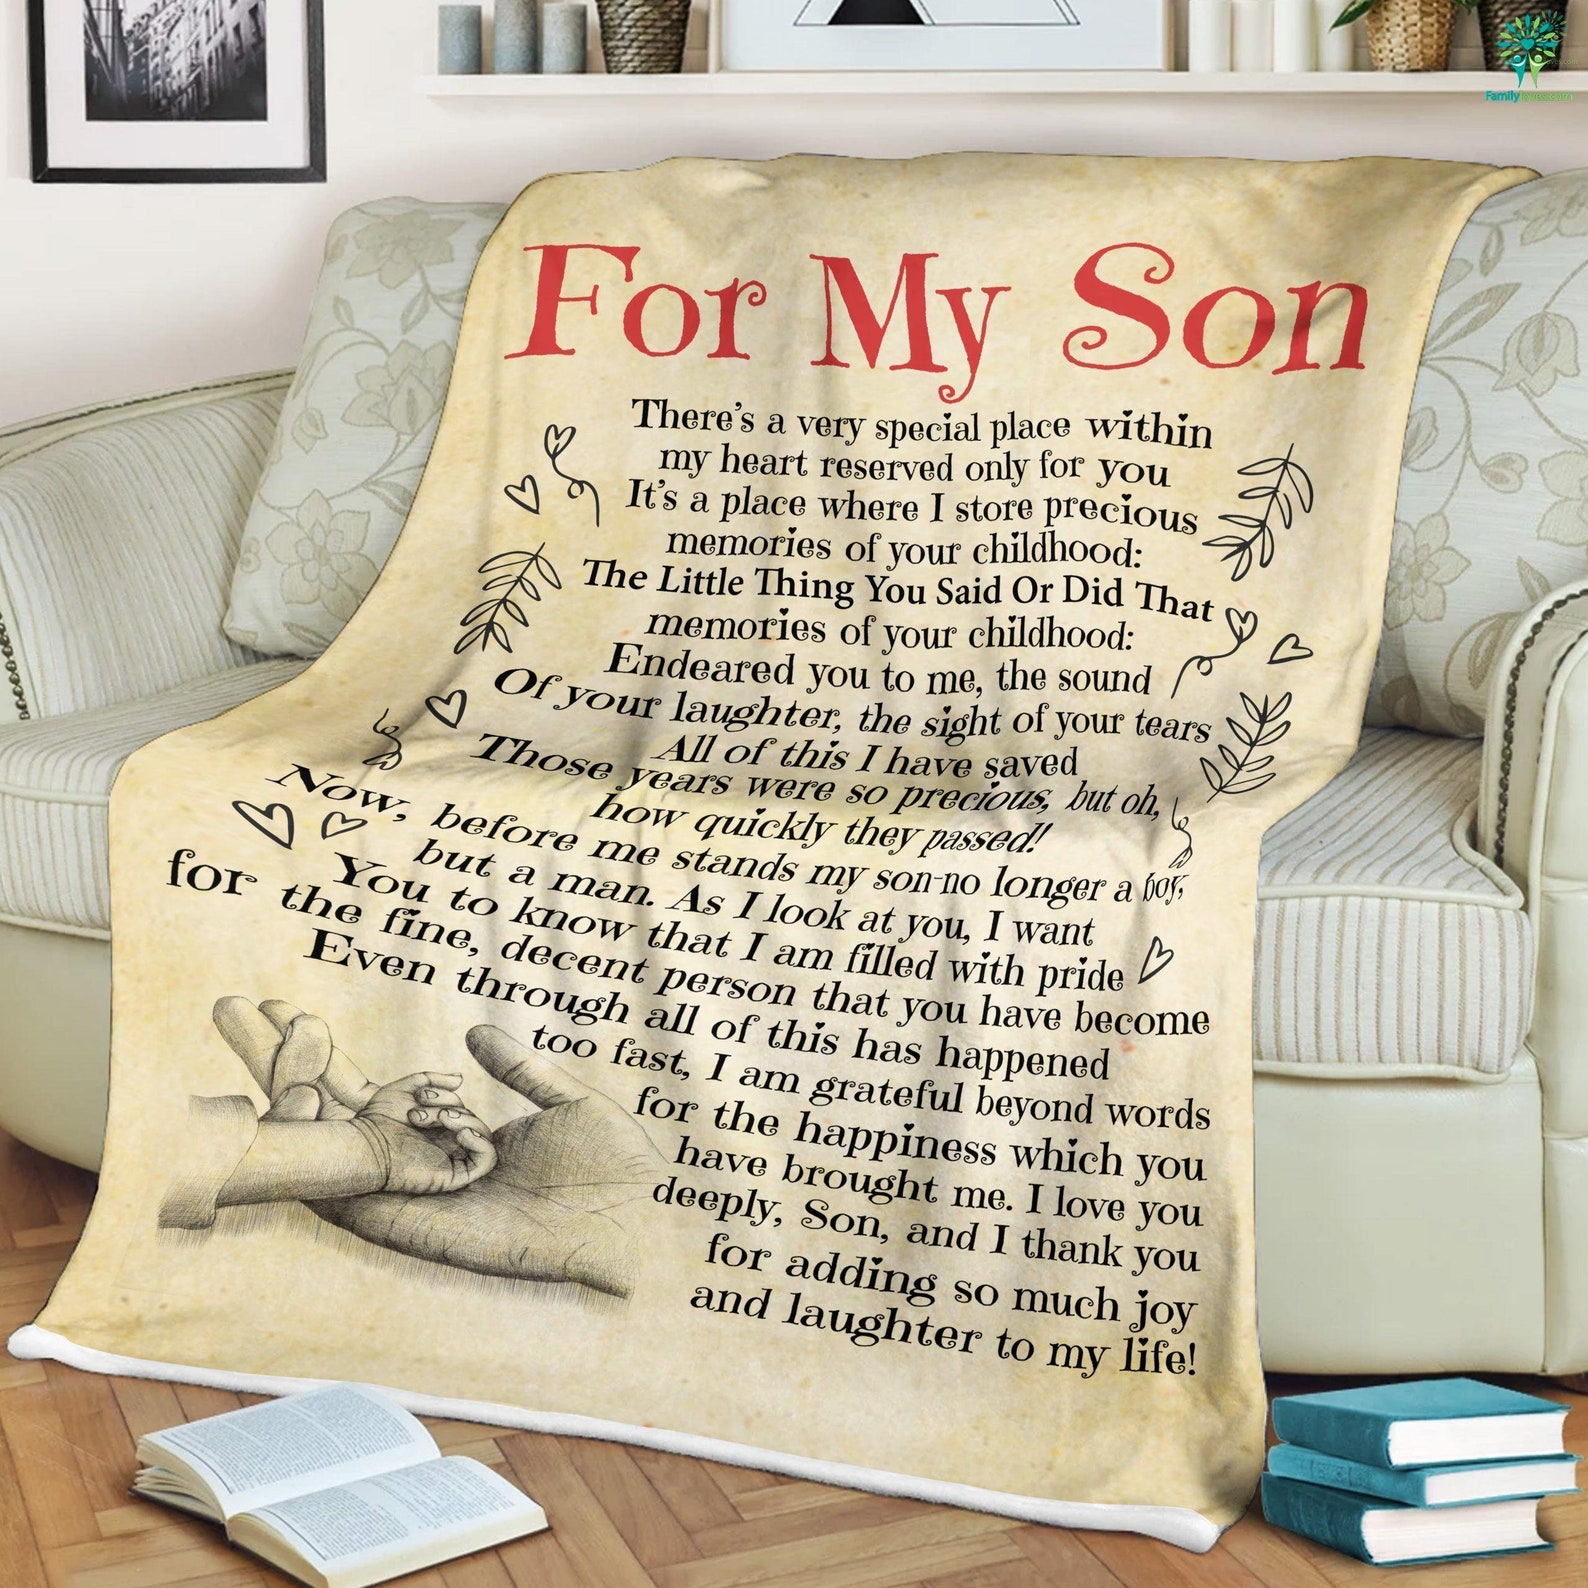 Believe to son. To my son Blanket from mom dad Gifts for son Sherpa Throw Blanket with warm Words Fuzzy Soft Blankets Birthday Gifts for son. Son inside